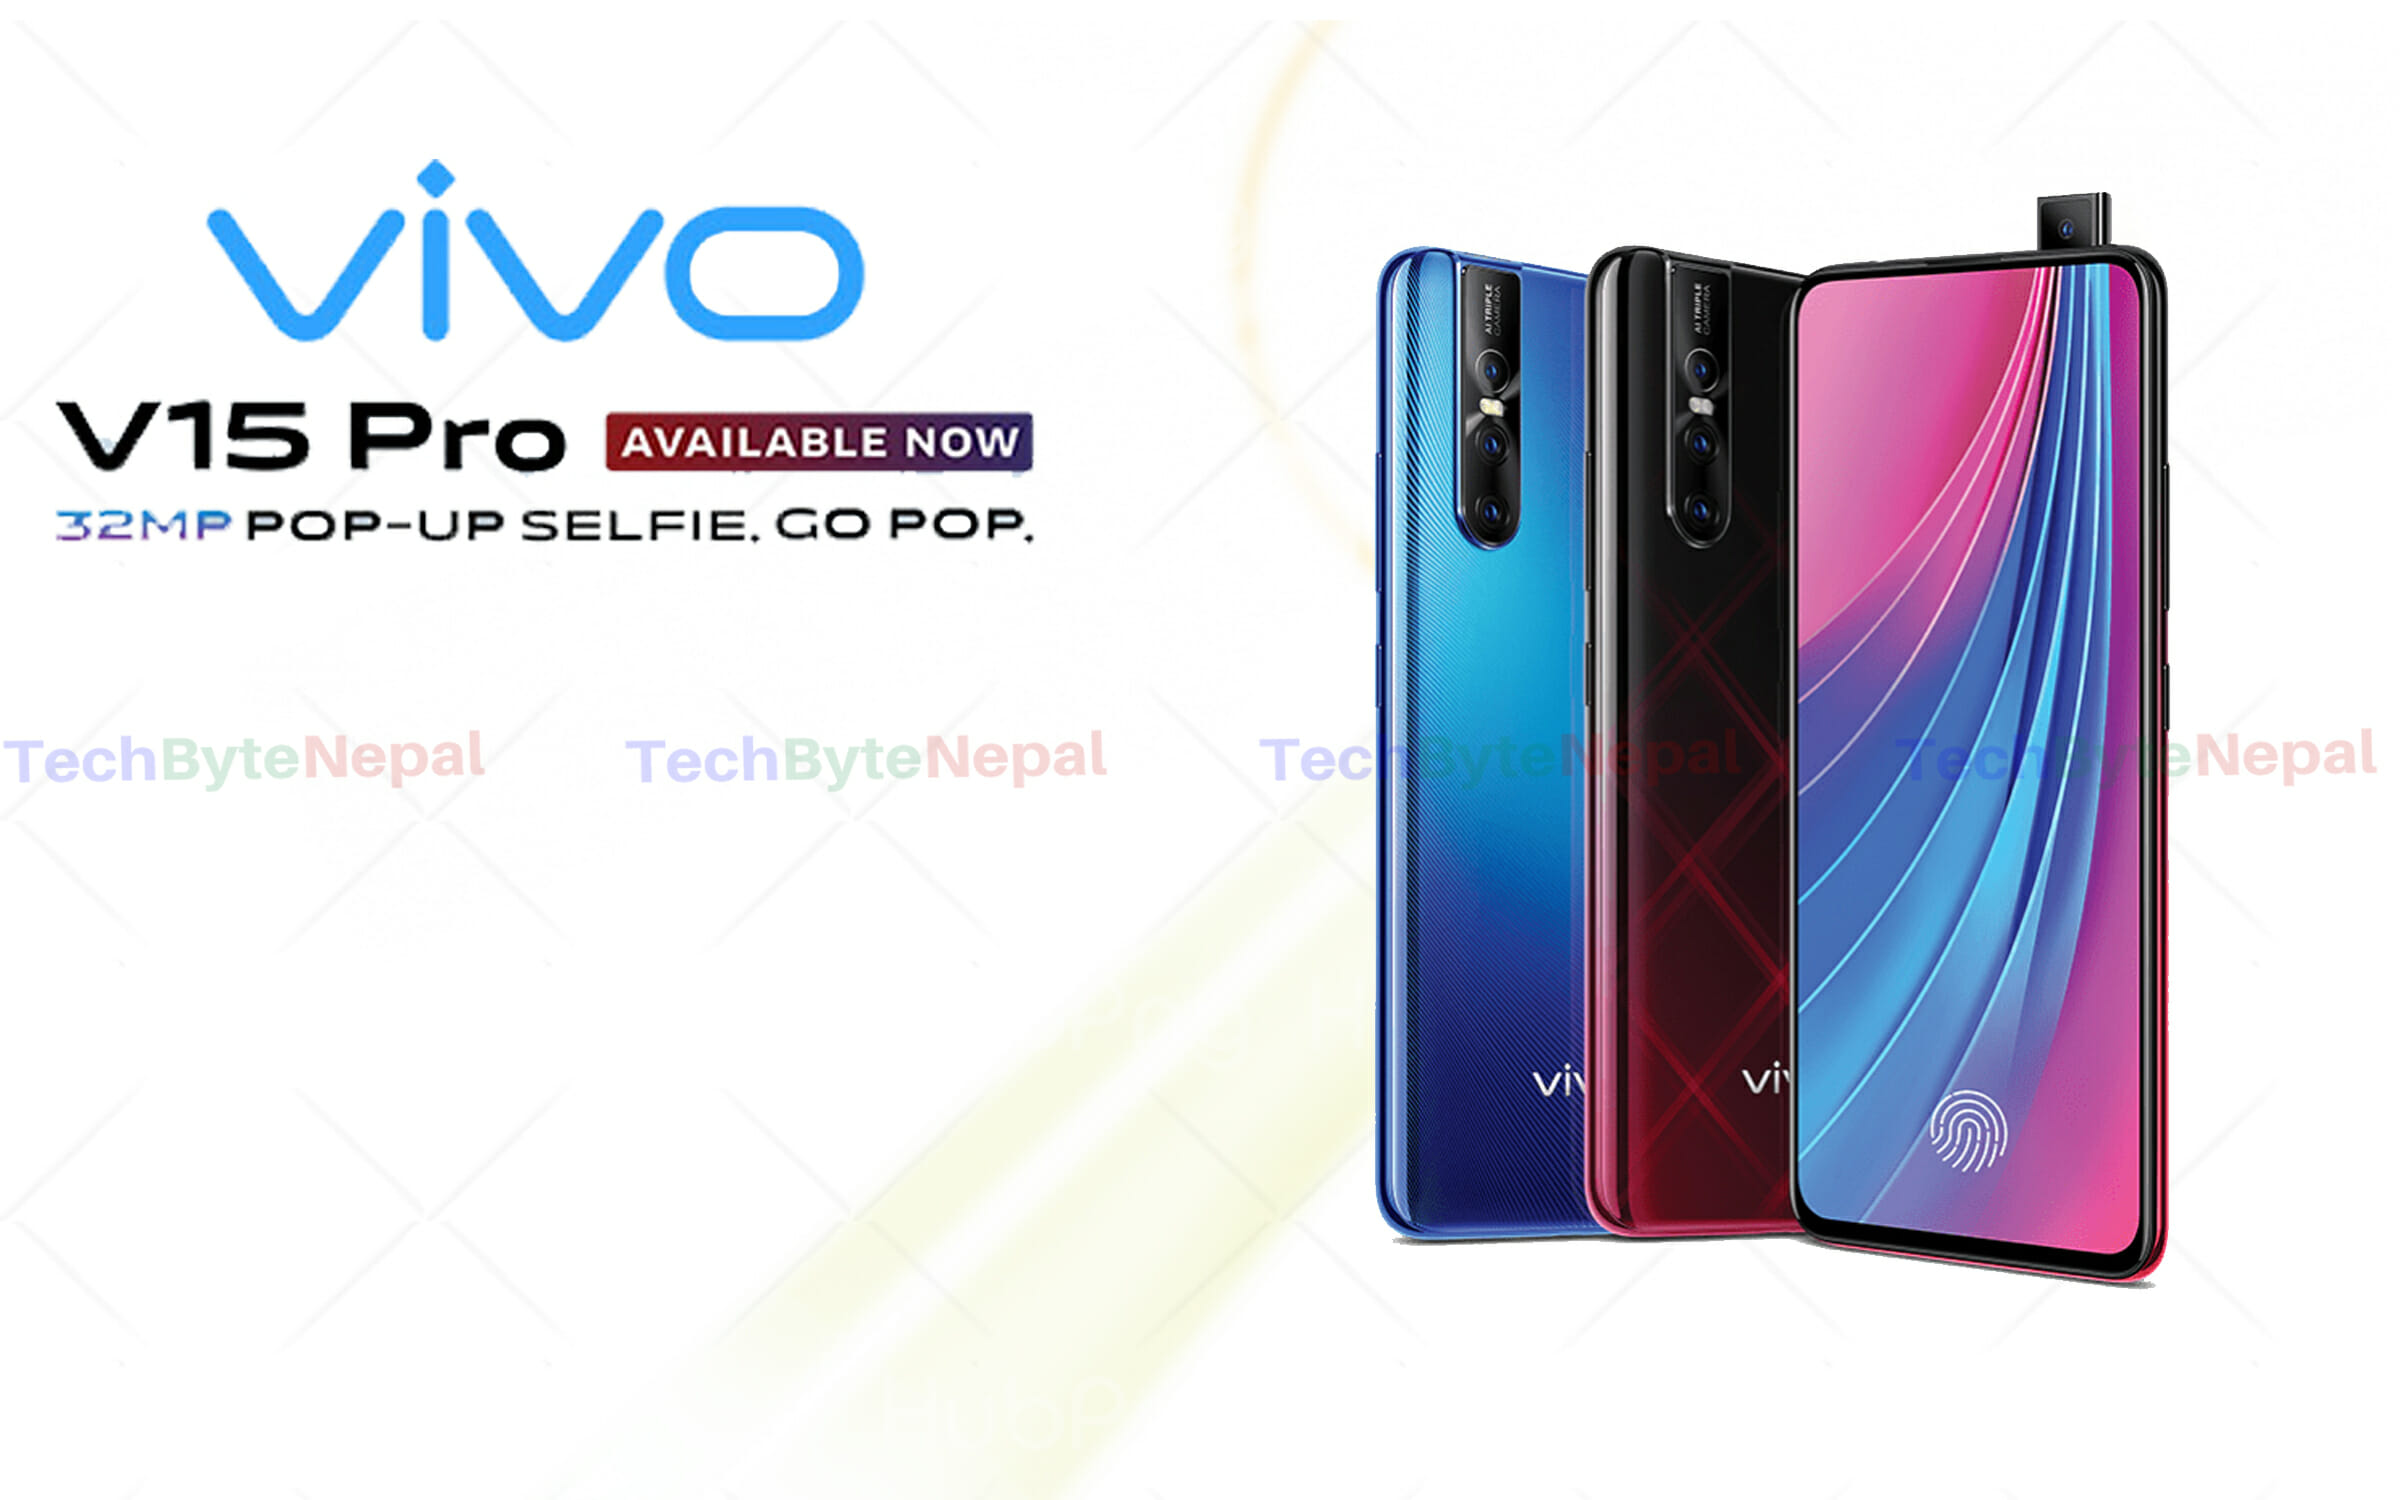 Vivo V15 Pro: High-Performance Budget Phone Review and Price in Nepal